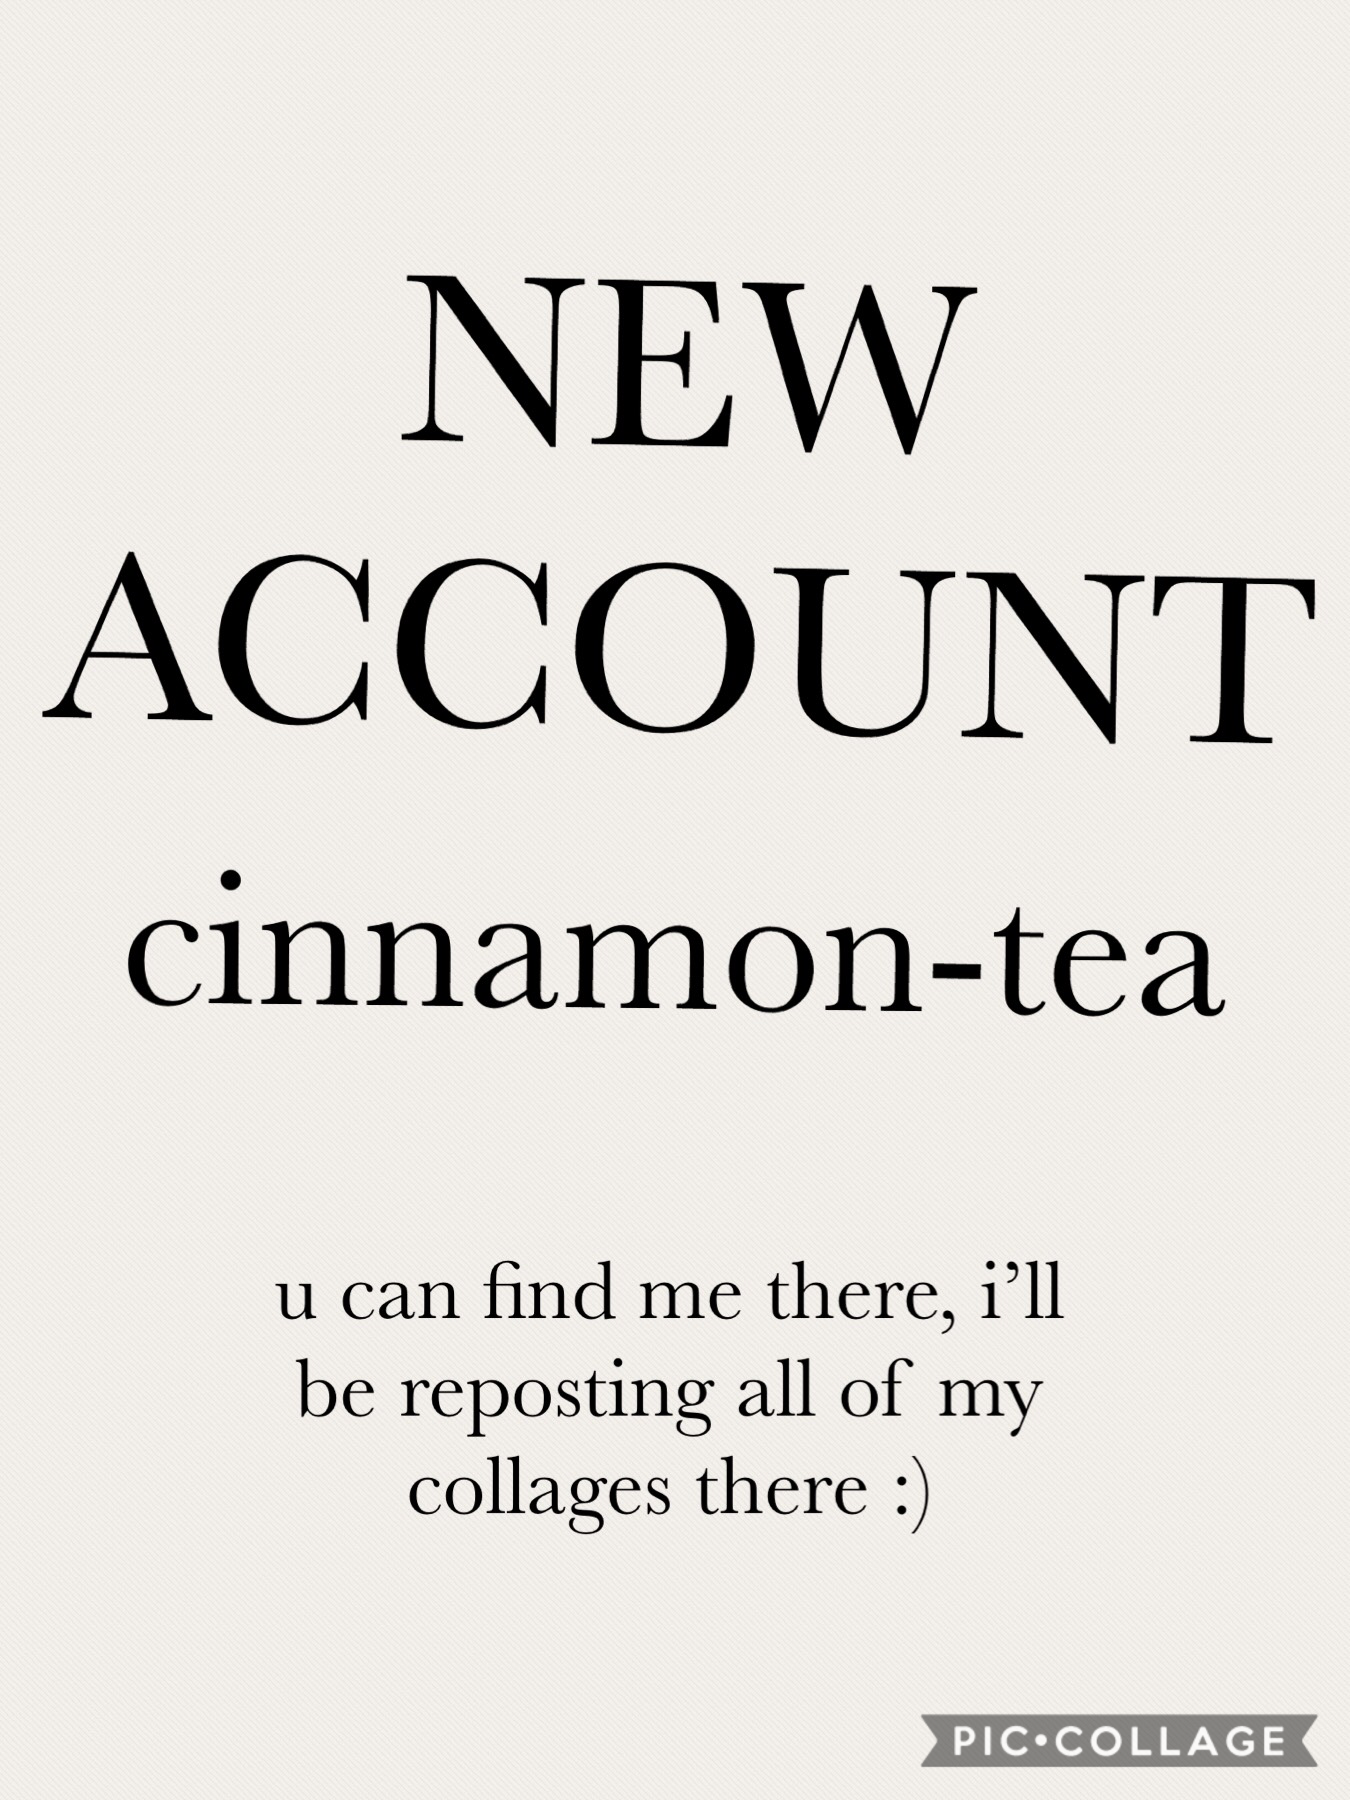 pls follow me at cinnamon-tea, this acc will be dead soon because of technical difficulties 